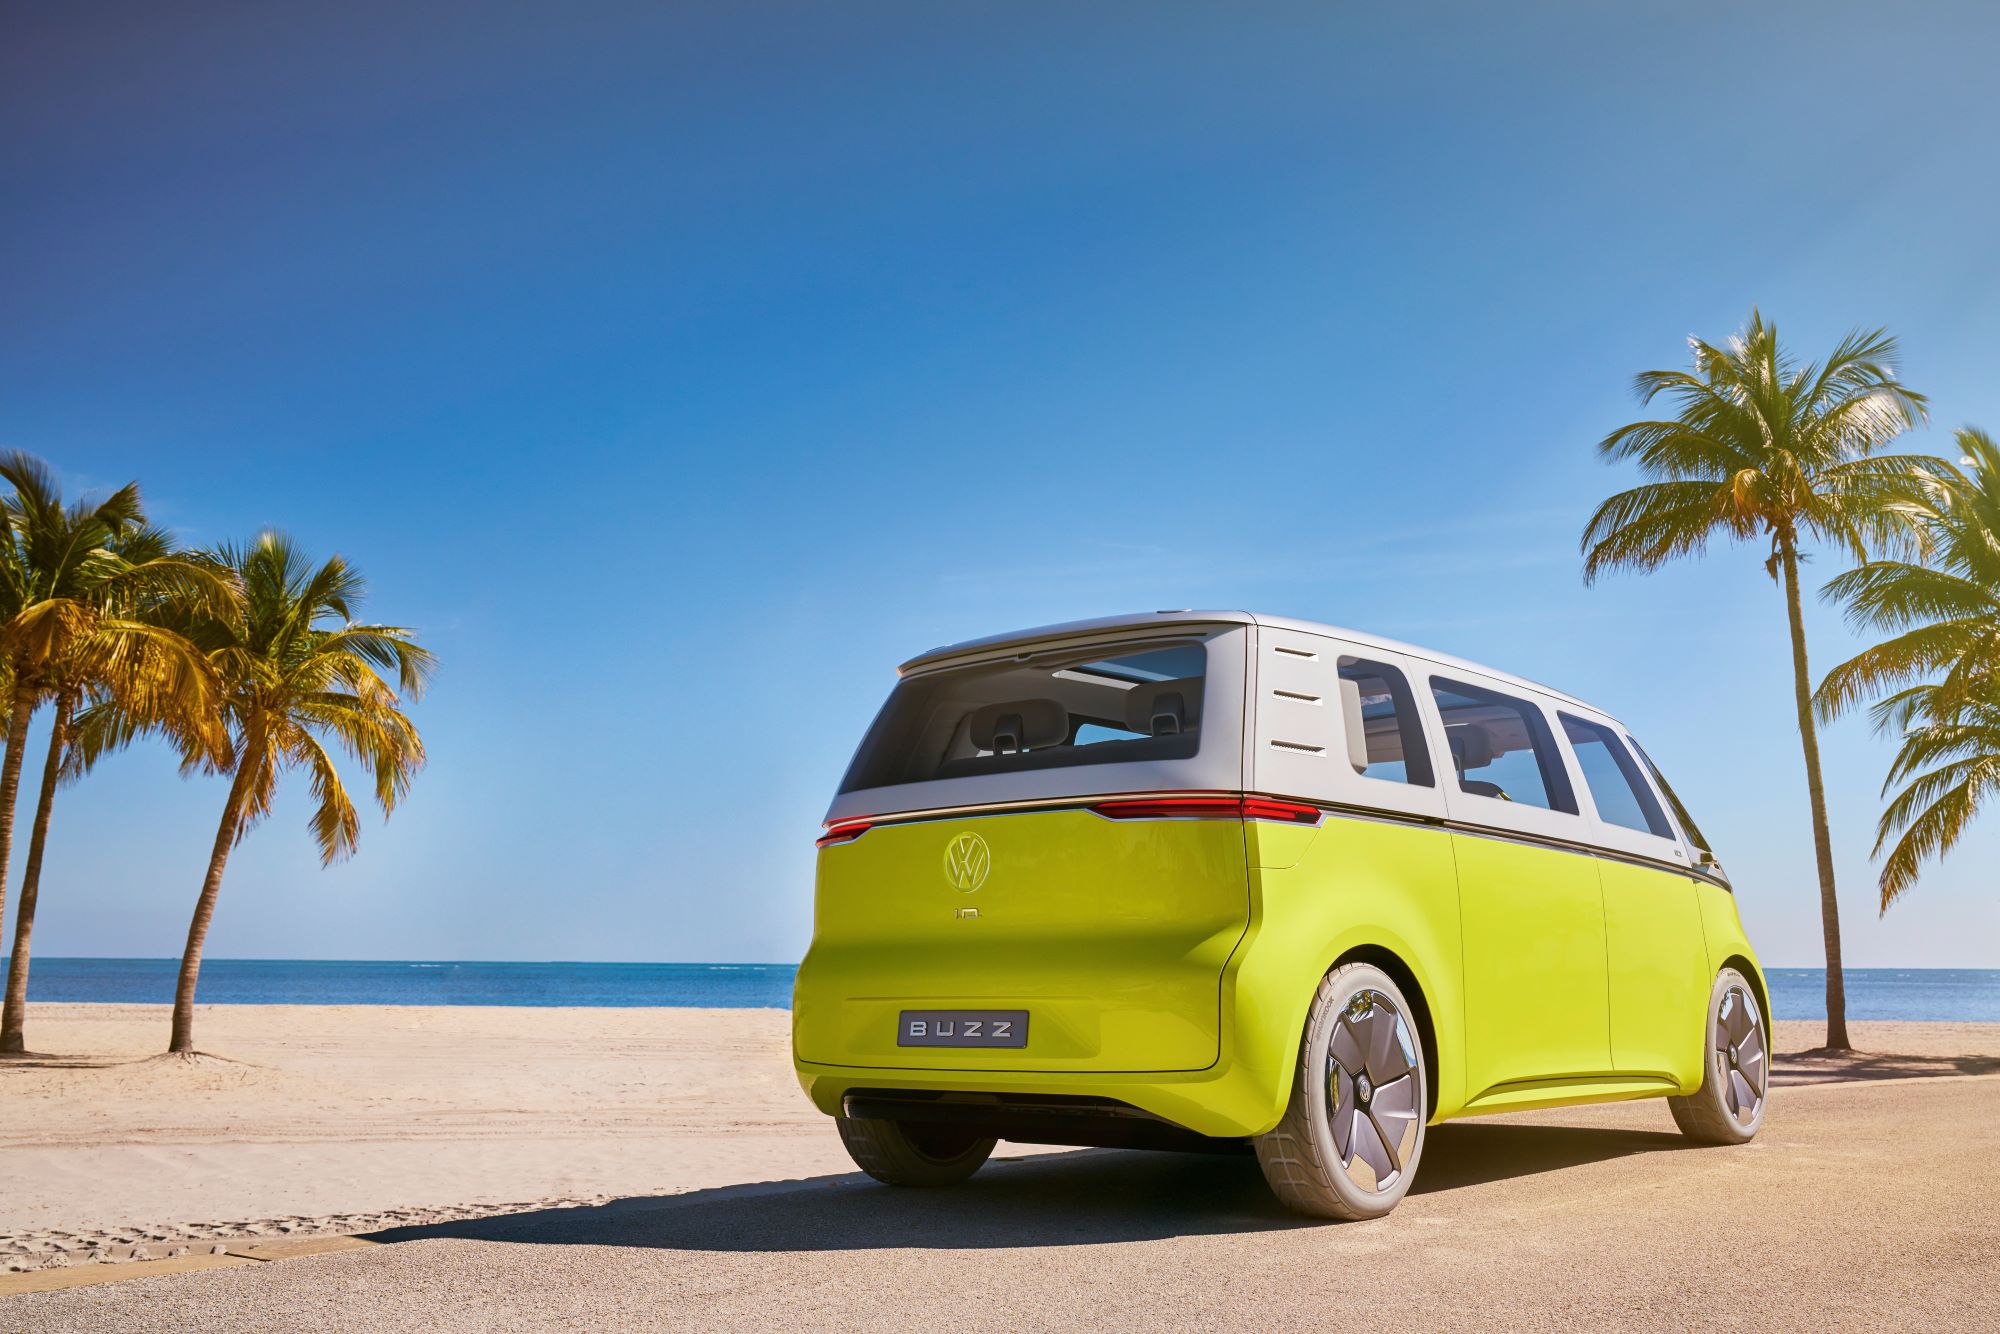 The Volkswagen ID. Buzz Concept in yellow and white parked on a tropical beach near palm trees